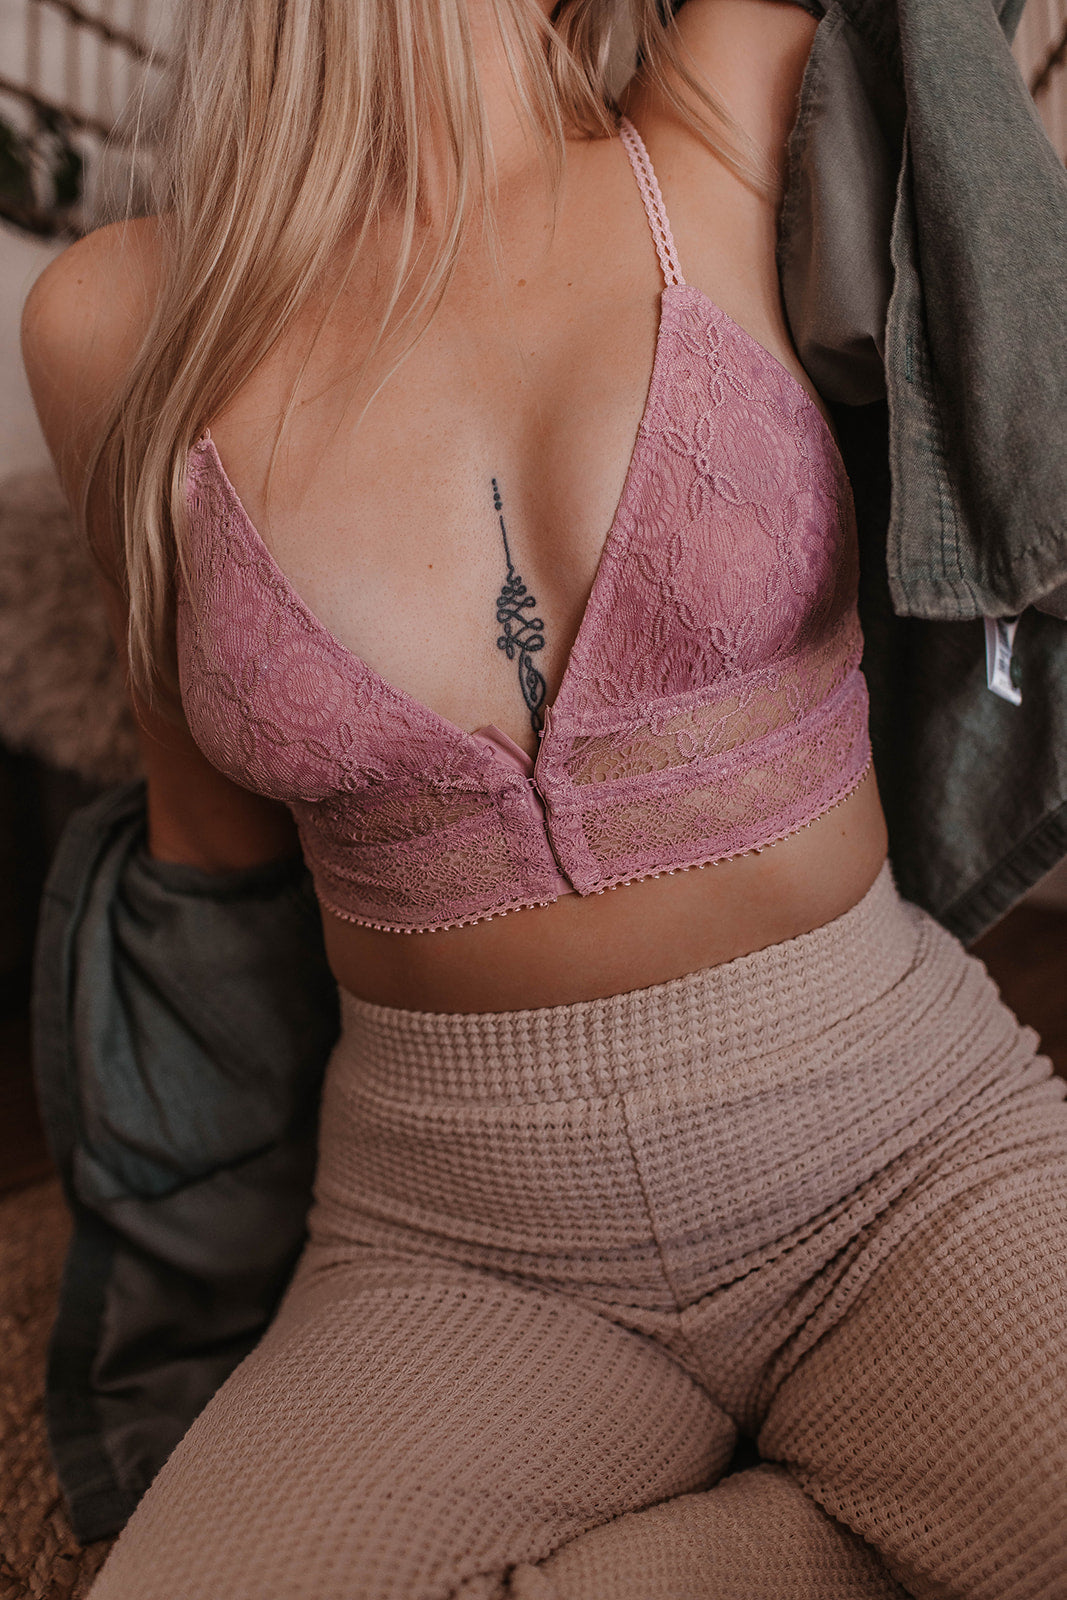 February 2022s Bralette – Layered With Lace